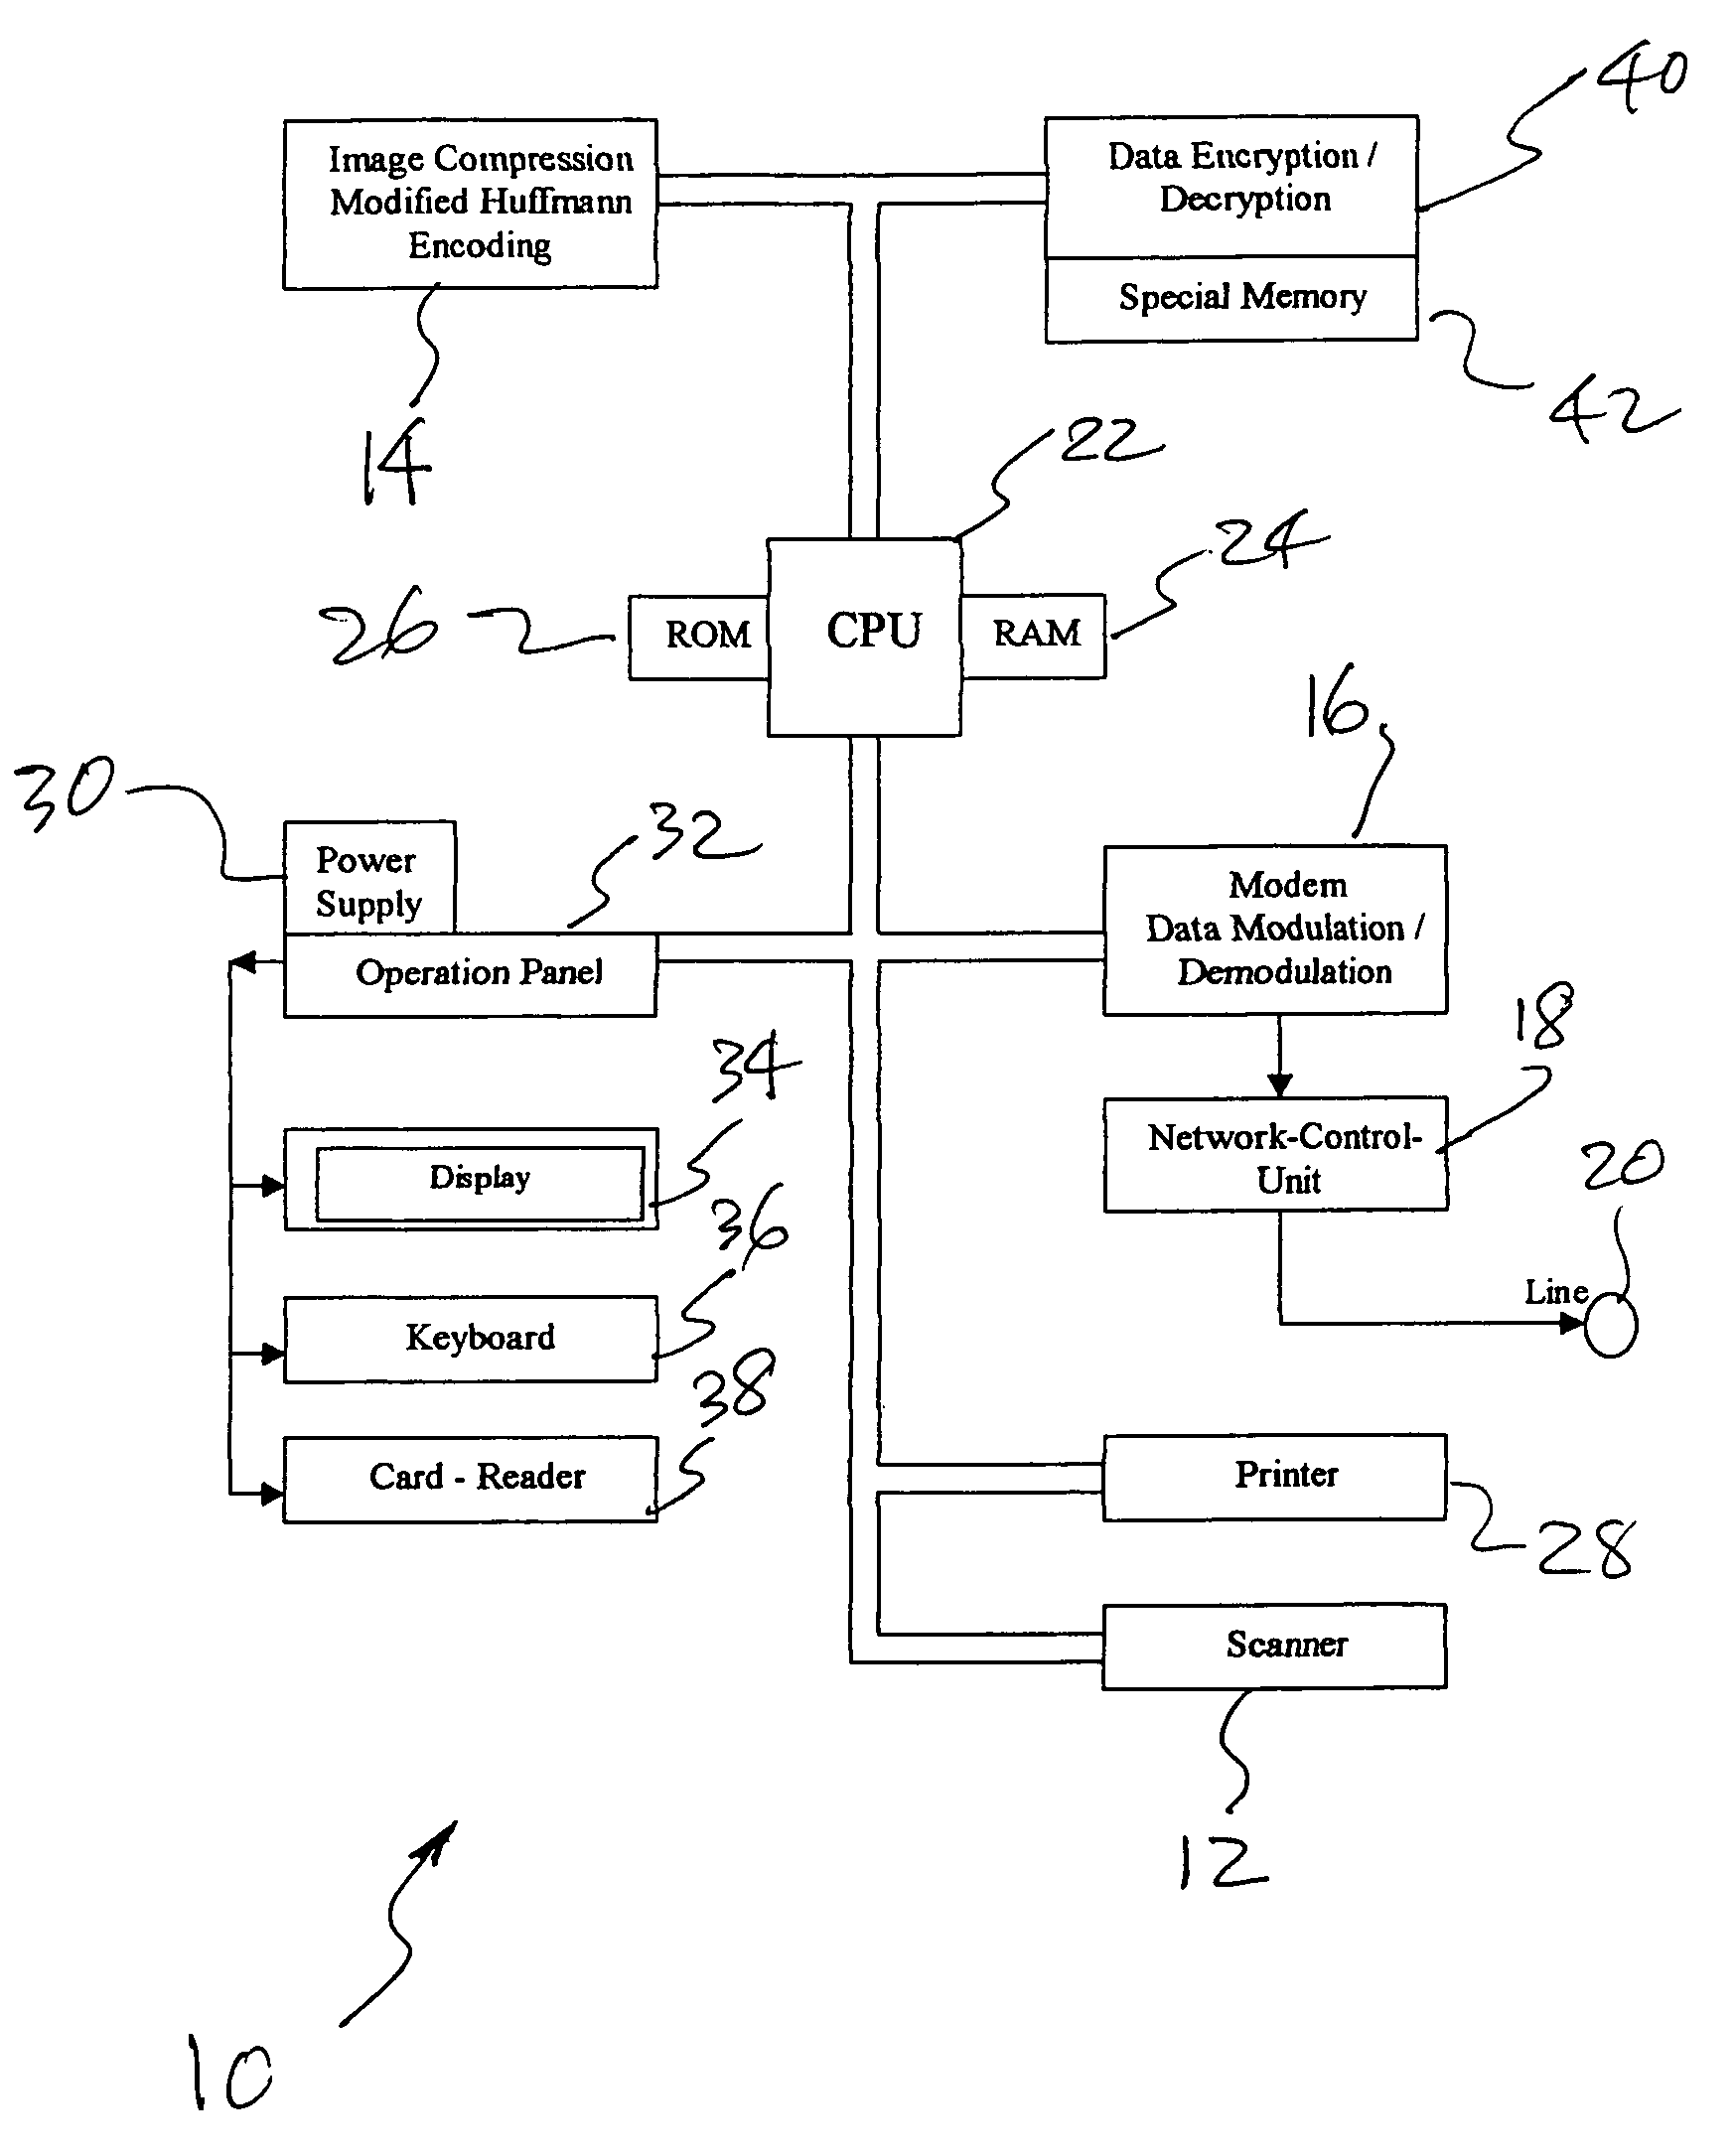 Method and apparatus for secured facsimile transmission